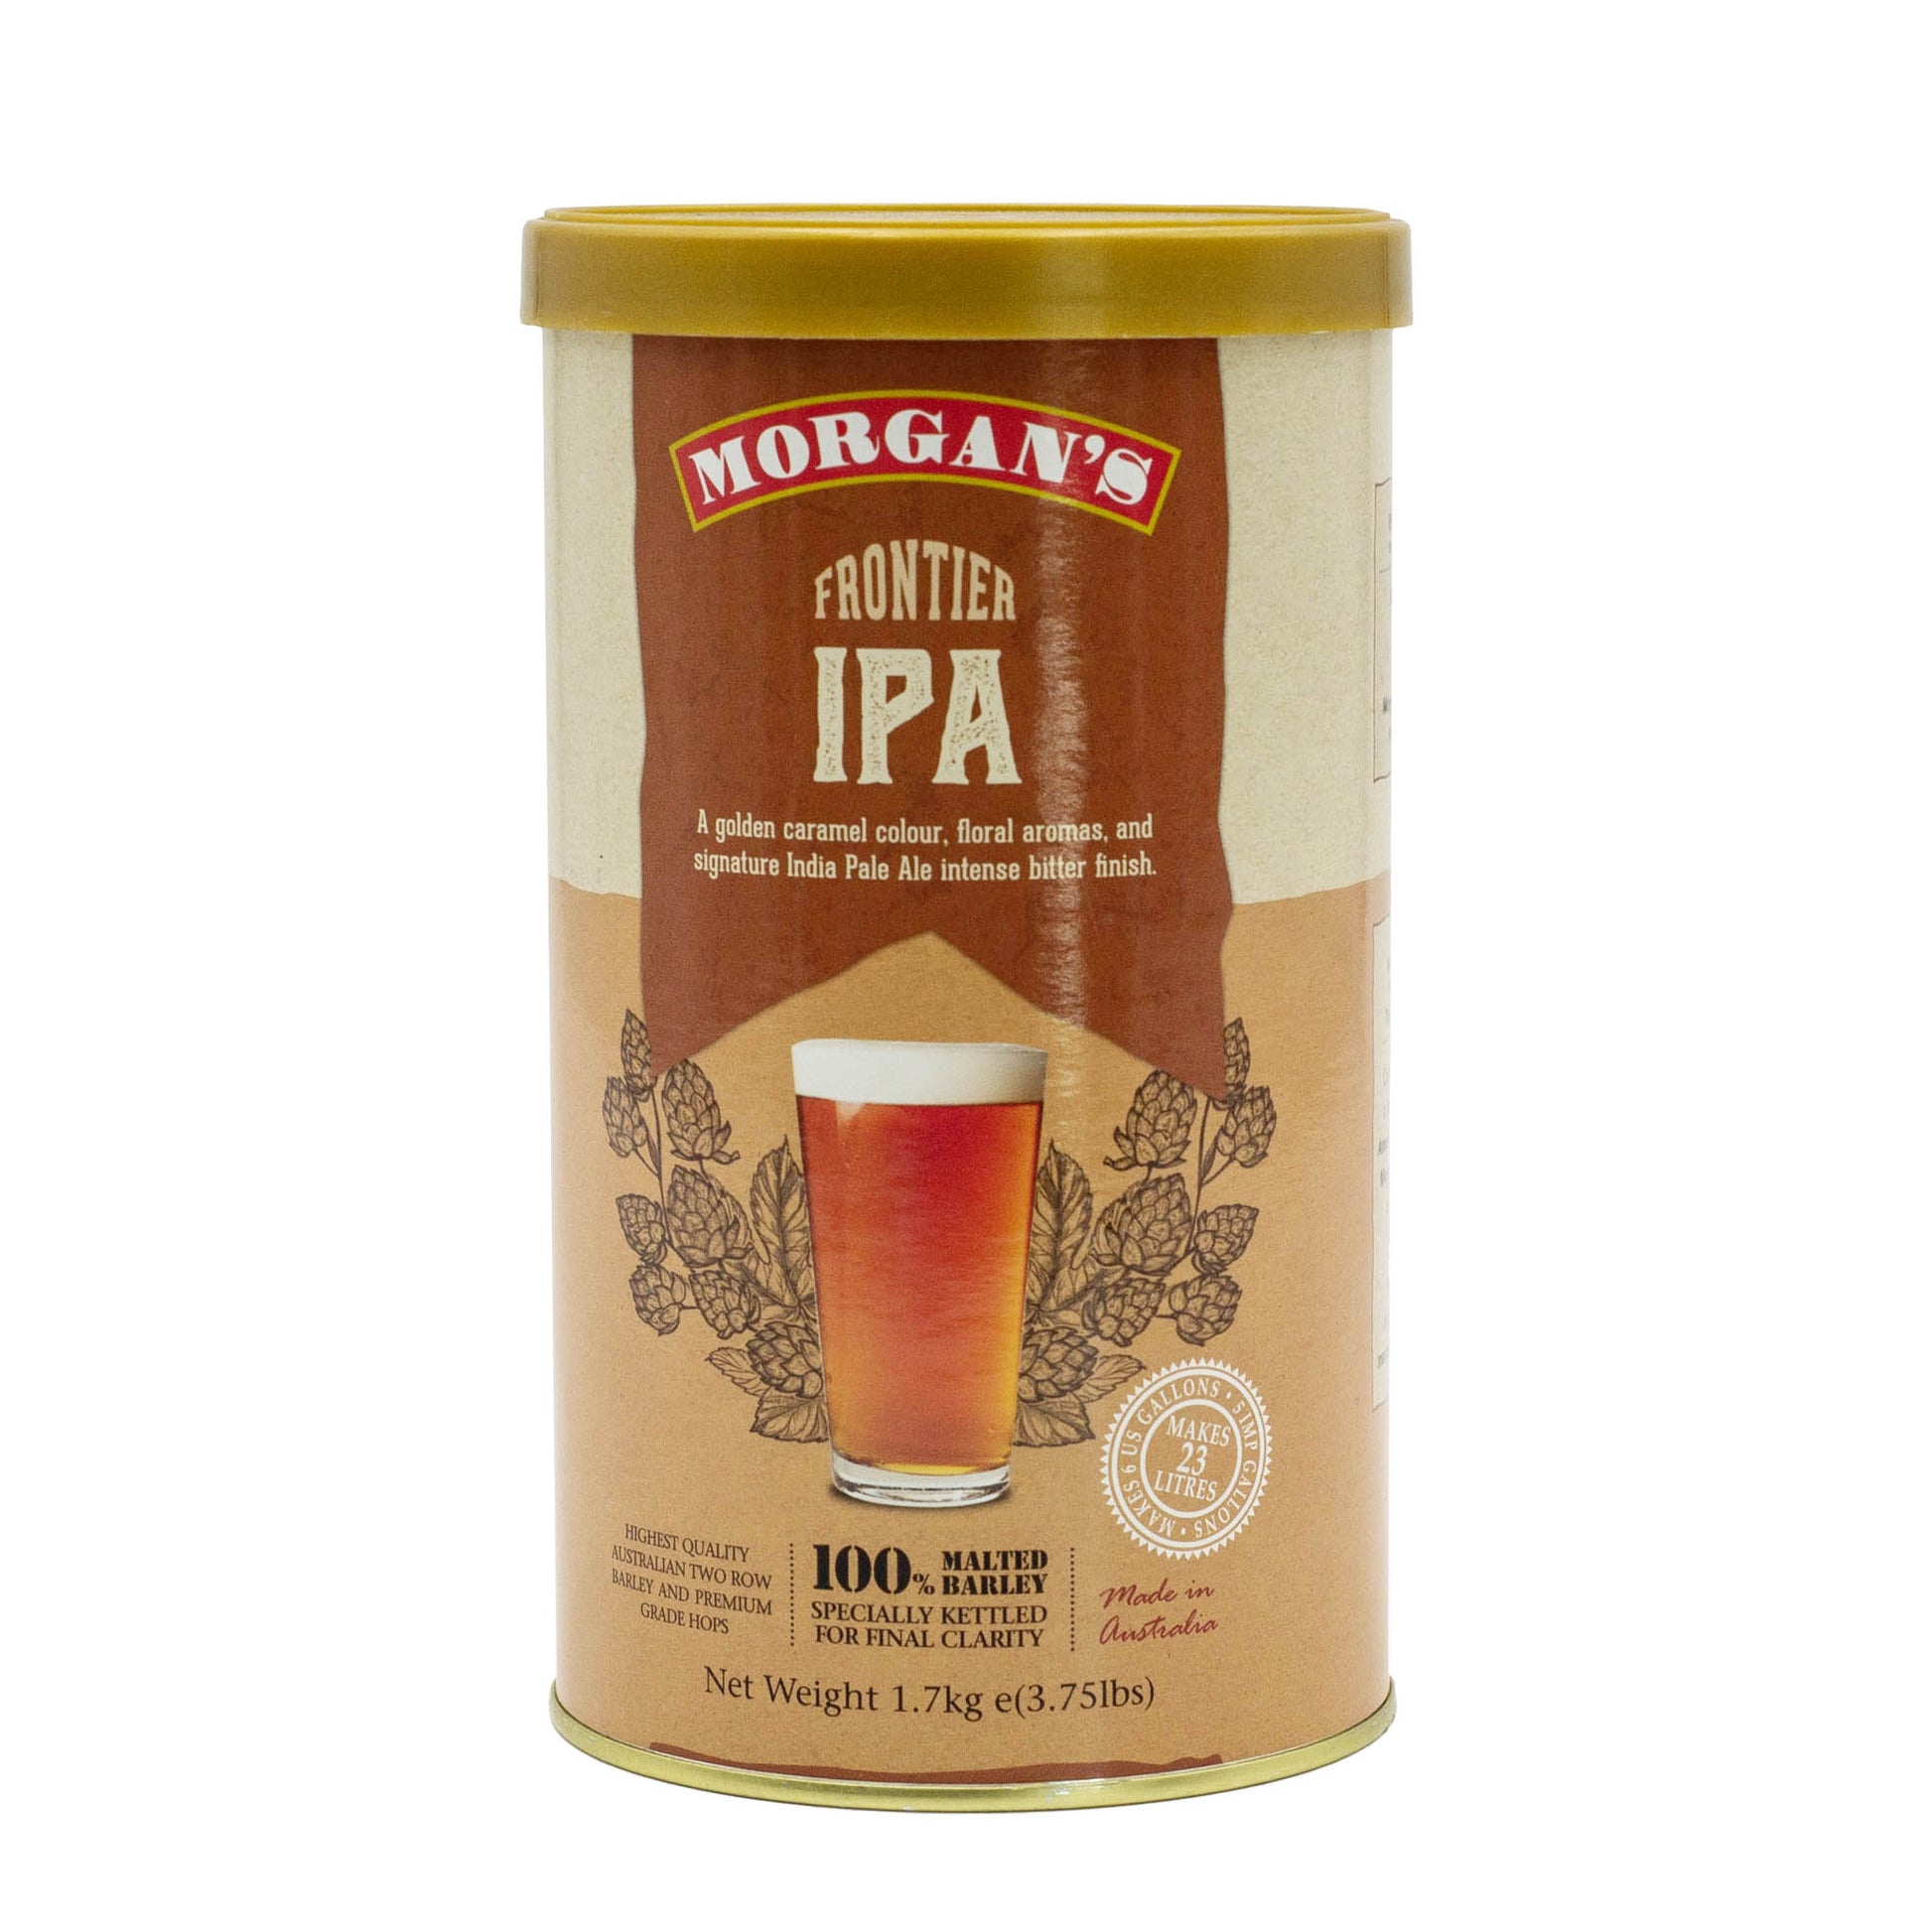 Morgans Ultra Premium frontier IPA brew tin makes a golden caramel beer with floral aromas and bitter finish. 